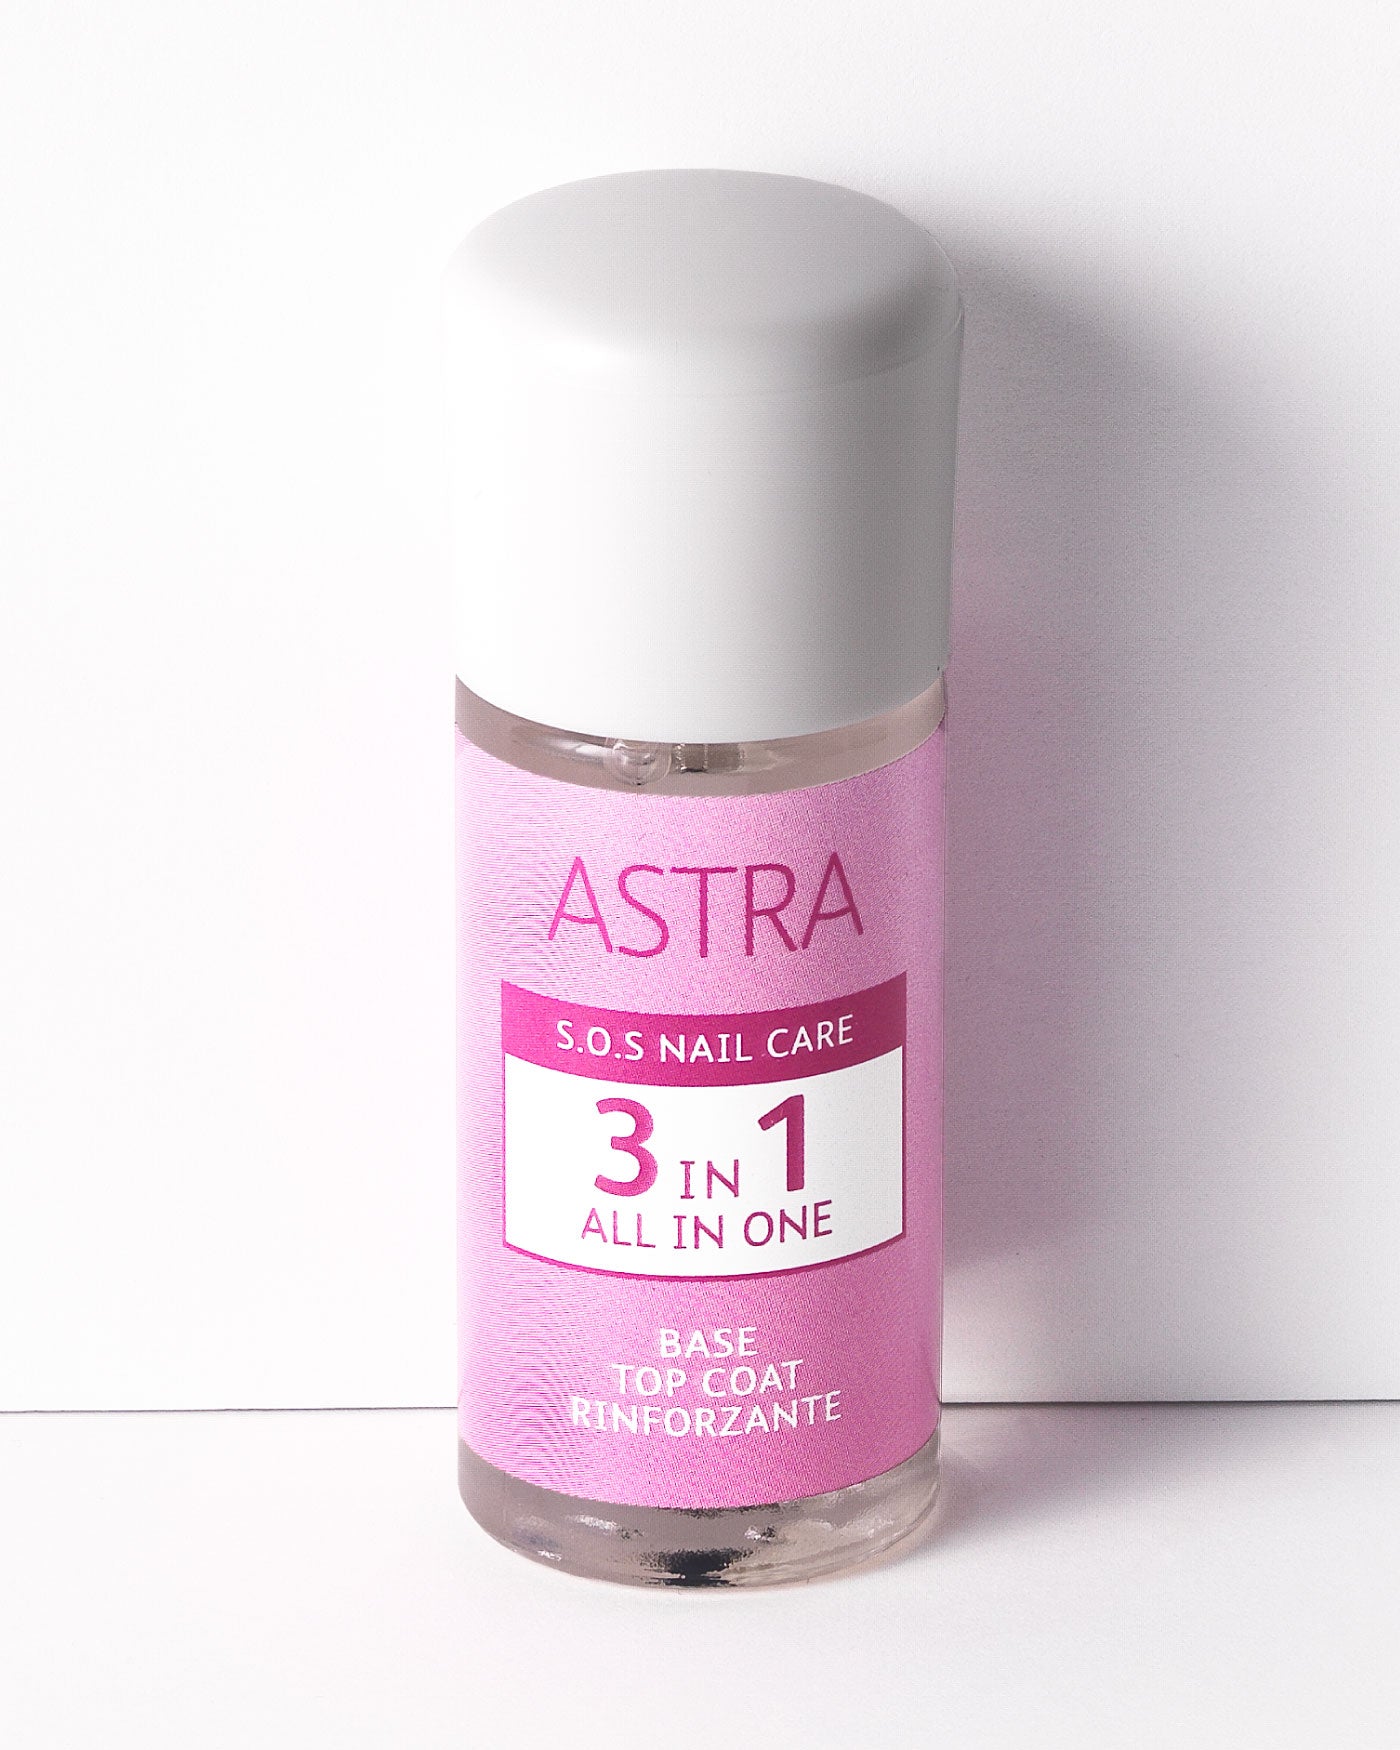 S.O.S NAIL CARE - 3 IN 1 ALL IN ONE - Make-Up - Astra Make-Up